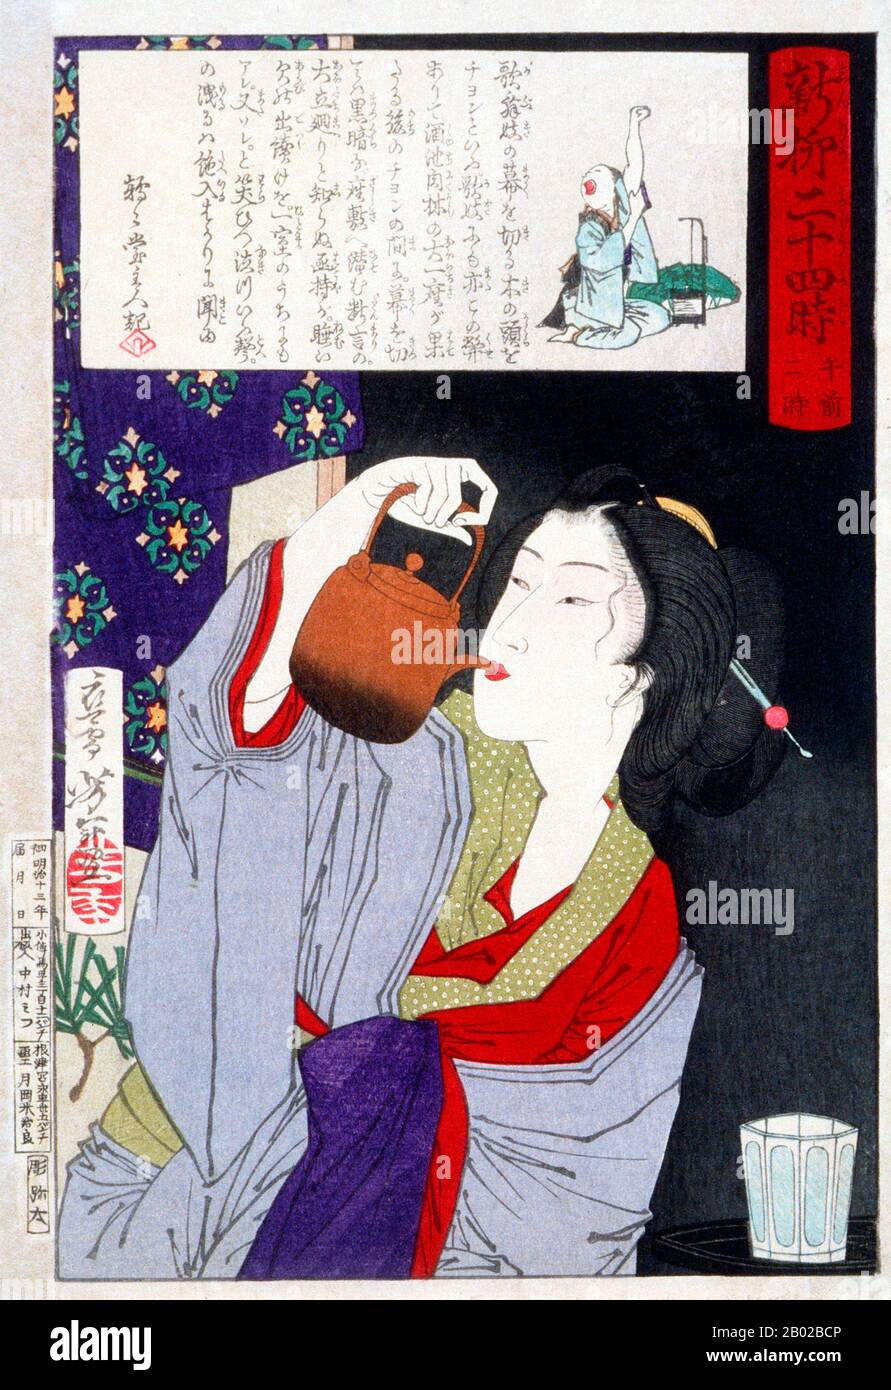 Tsukioka Yoshitoshi (30 April 1839 – 9 June 1892) (Japanese: 月岡 芳年; also named Taiso Yoshitoshi 大蘇 芳年) was a Japanese artist and Ukiyo-e woodblock print master.  He is widely recognized as the last great master of Ukiyo-e, a type of Japanese woodblock printing. He is additionally regarded as one of the form's greatest innovators. His career spanned two eras – the last years of Edo period Japan, and the first years of modern Japan following the Meiji Restoration. Like many Japanese, Yoshitoshi was interested in new things from the rest of the world, but over time he became increasingly concerne Stock Photo